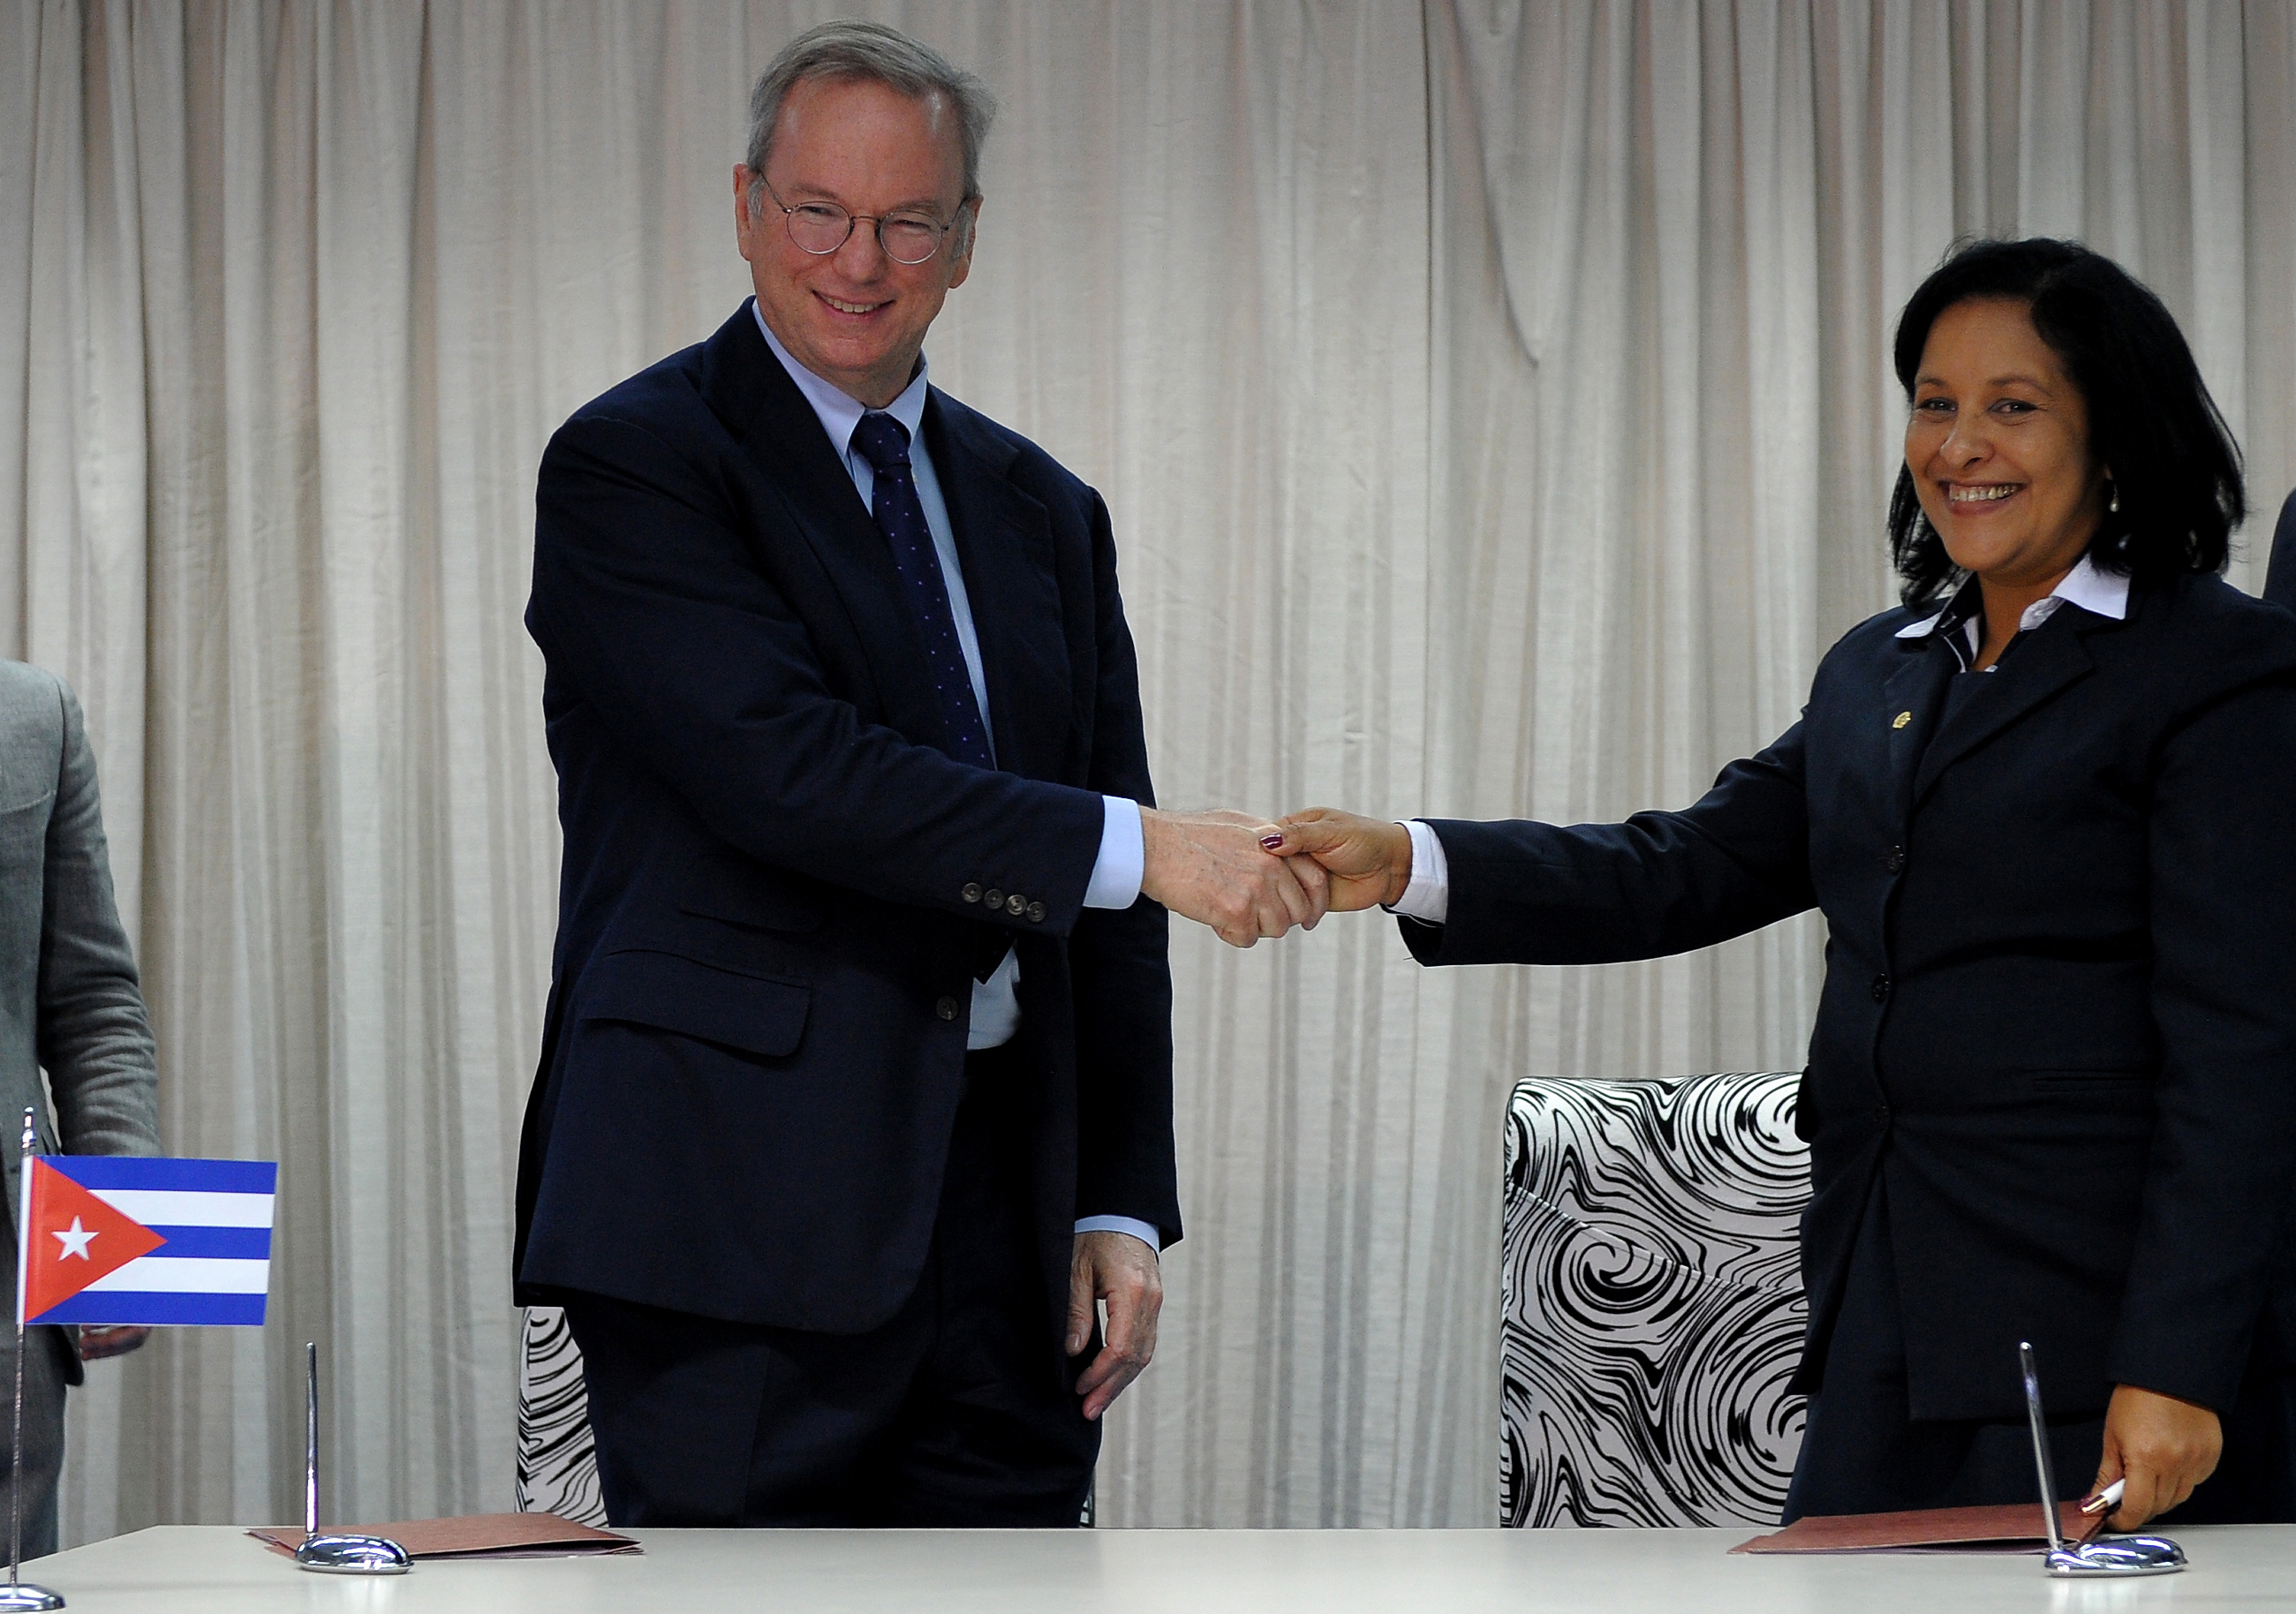 Google Executive Chairman Eric Schmidt (L) and Cuban national telecom provider (ETECSA) president executive Mayra Arevich shake hands after the signing of a bilateral agreement in Havana, on December 12, 2016.  / AFP PHOTO / YAMIL LAGE